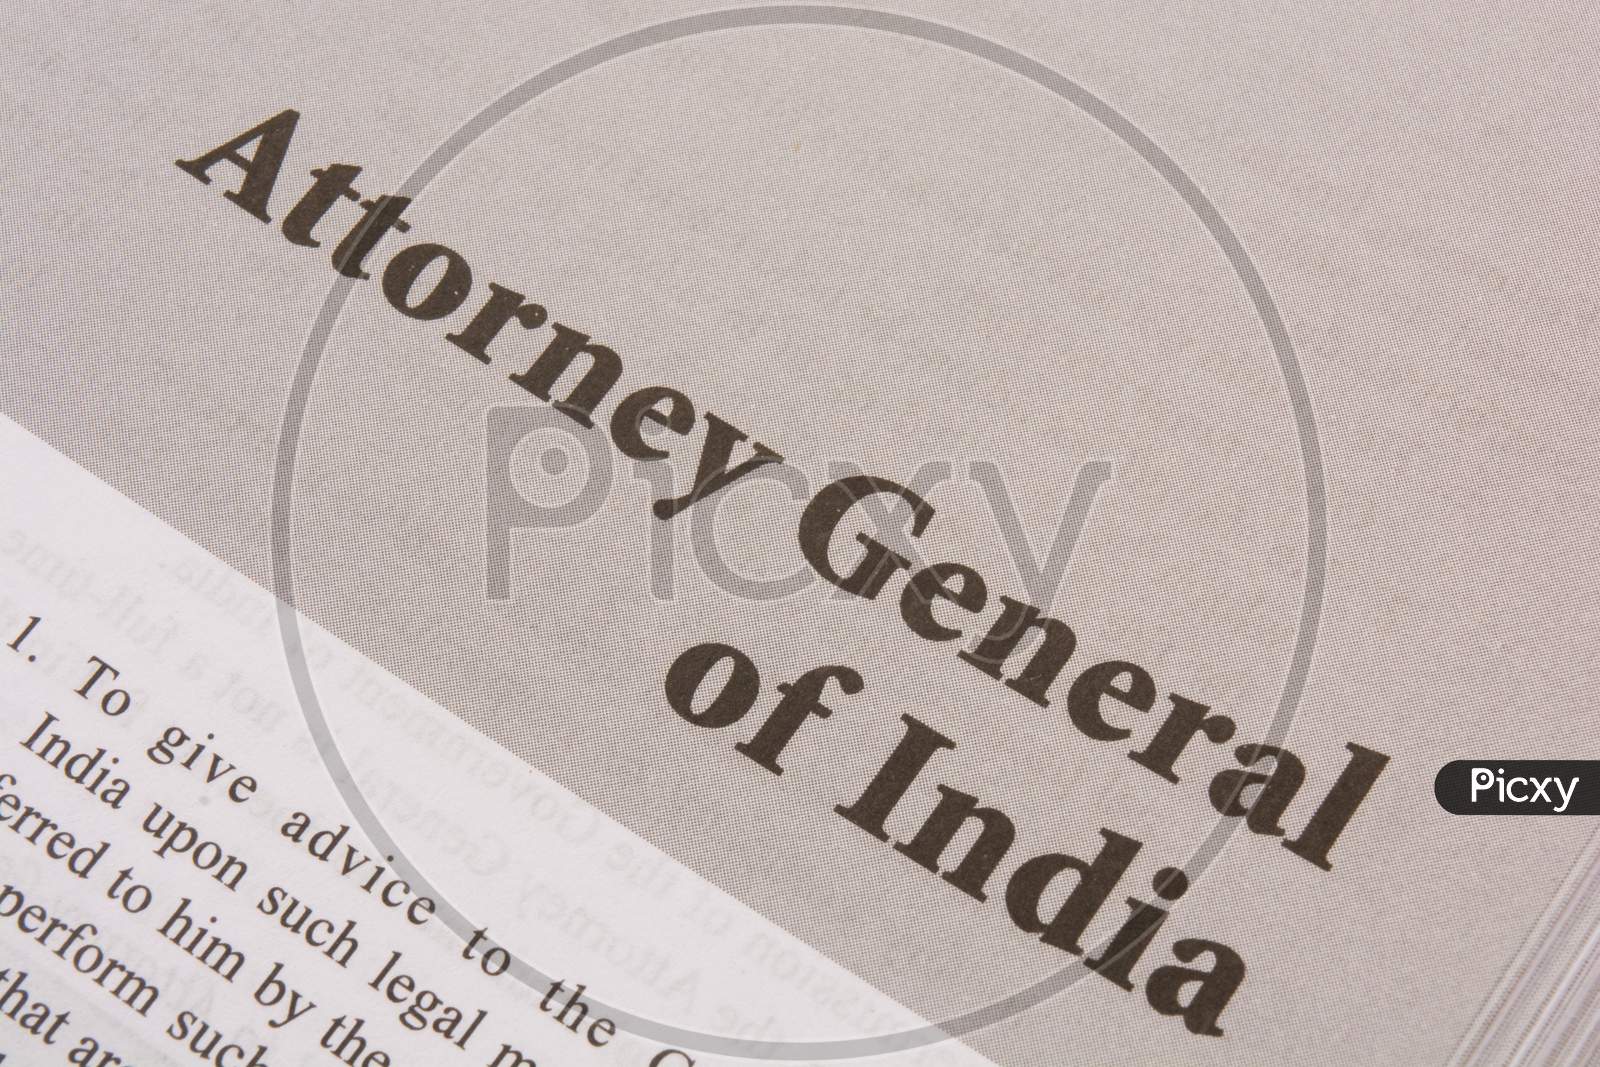 Attorney General Of India Printed On Black And White Paper